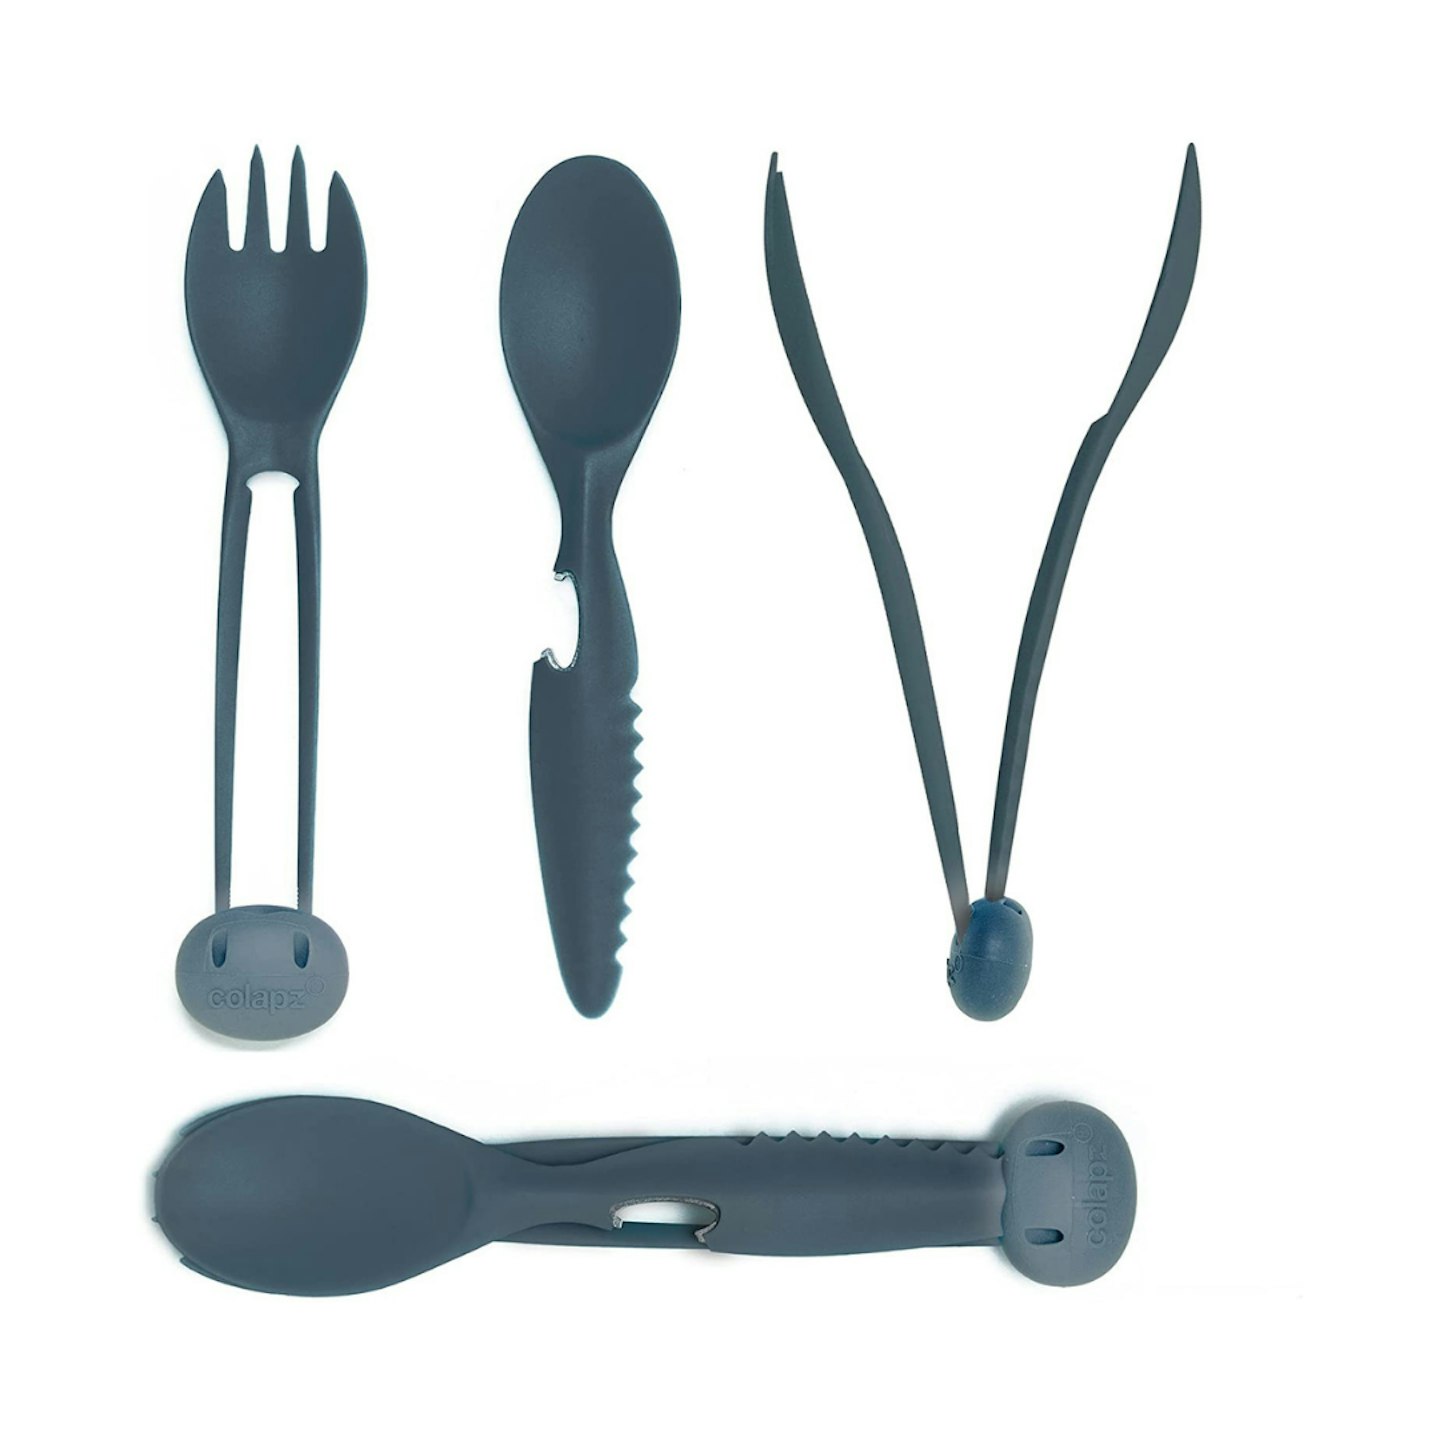 Colapz 7-in-1 Travel Cutlery Set